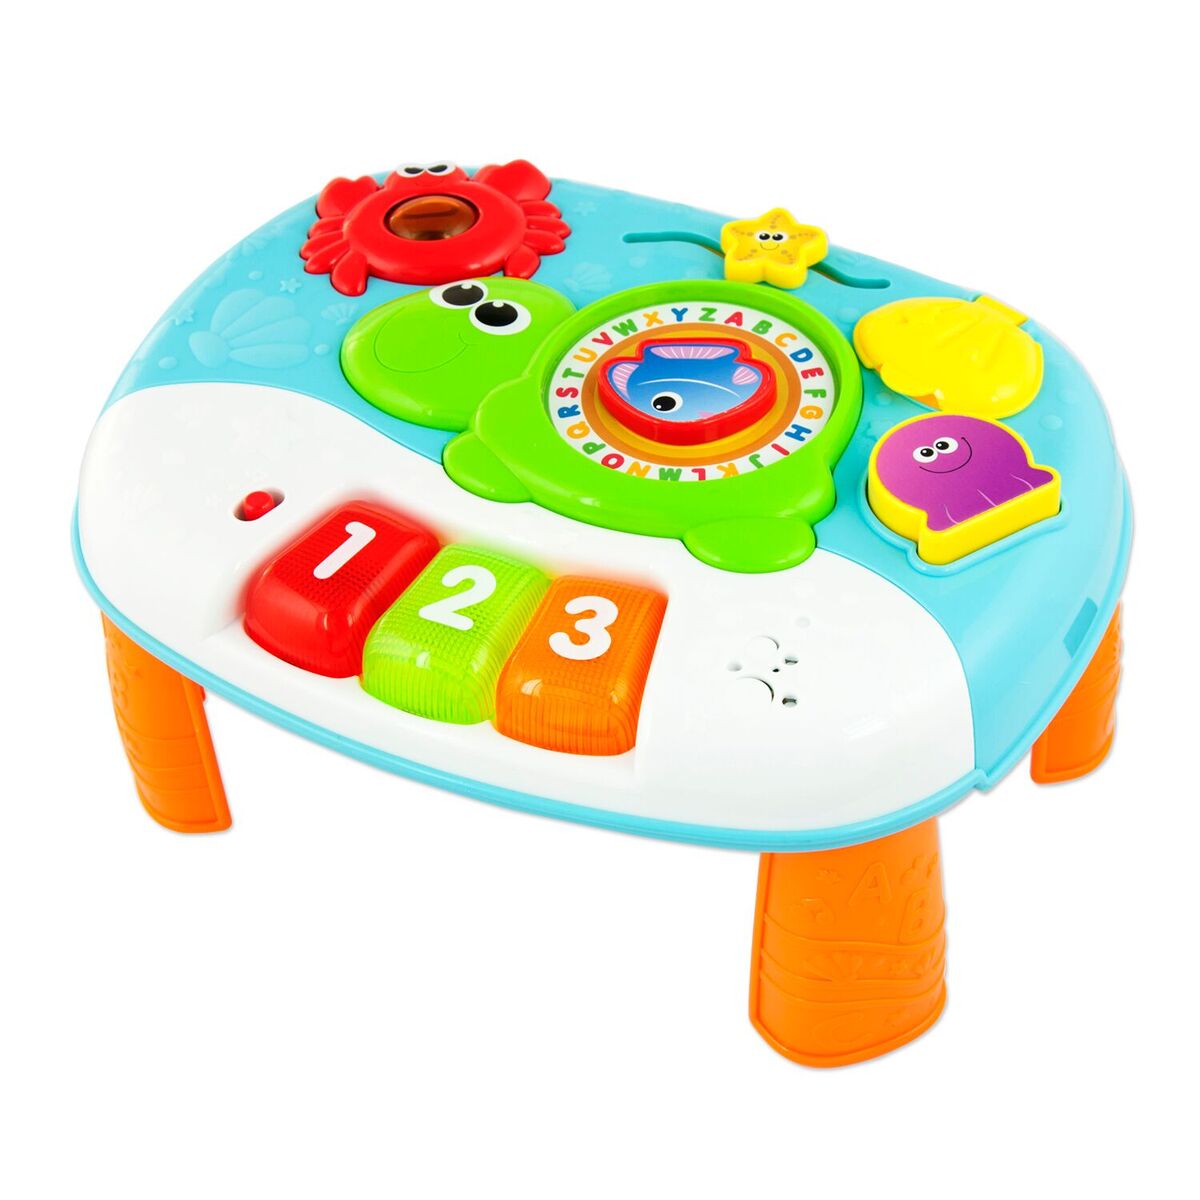 Picture of Winfun 0852 2-in-1 Ocean Fun Activity Center